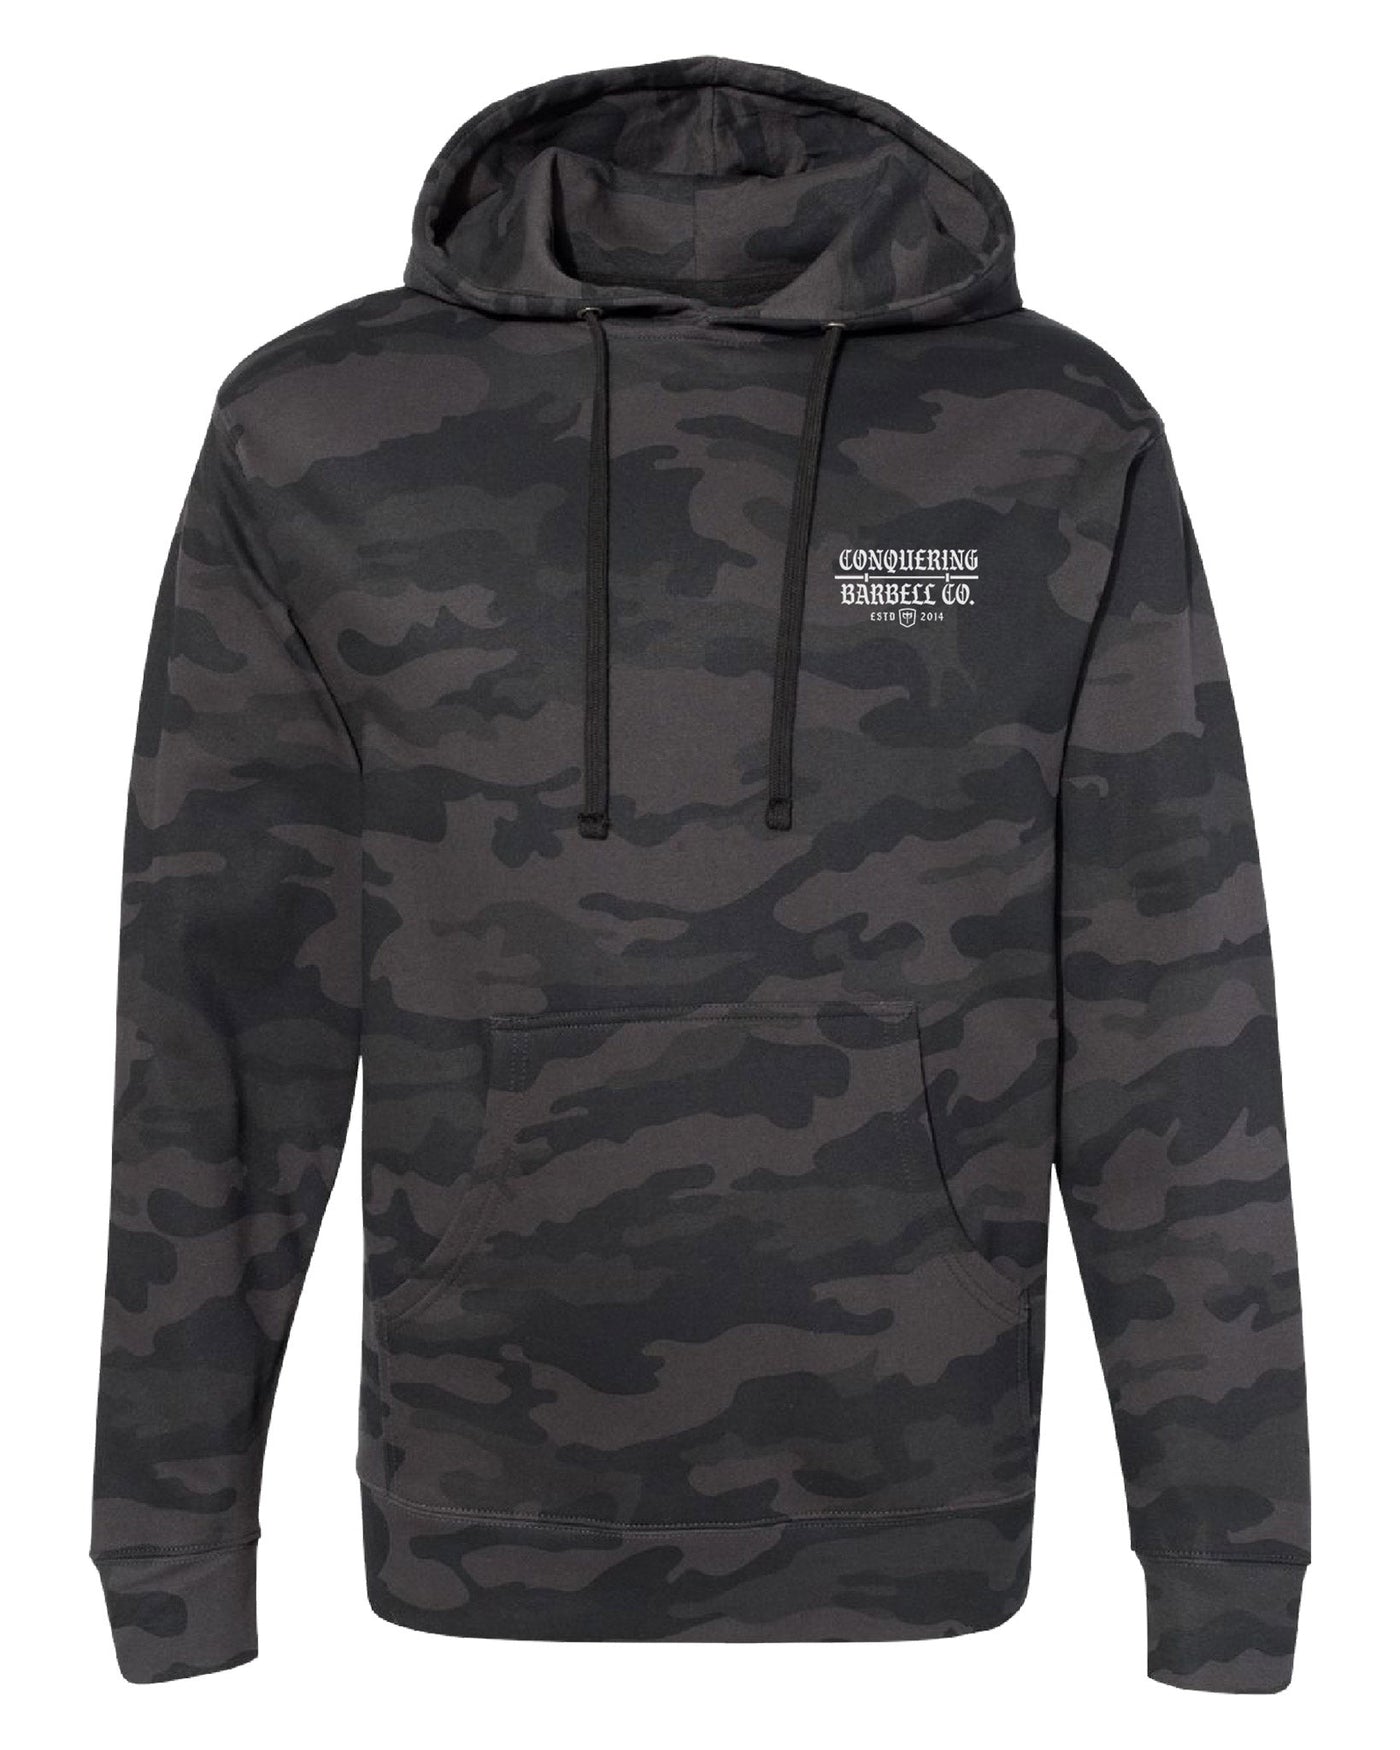 Squat Press Pull - Flagship - Black Camo Pullover Hoodie - Conquering Barbell